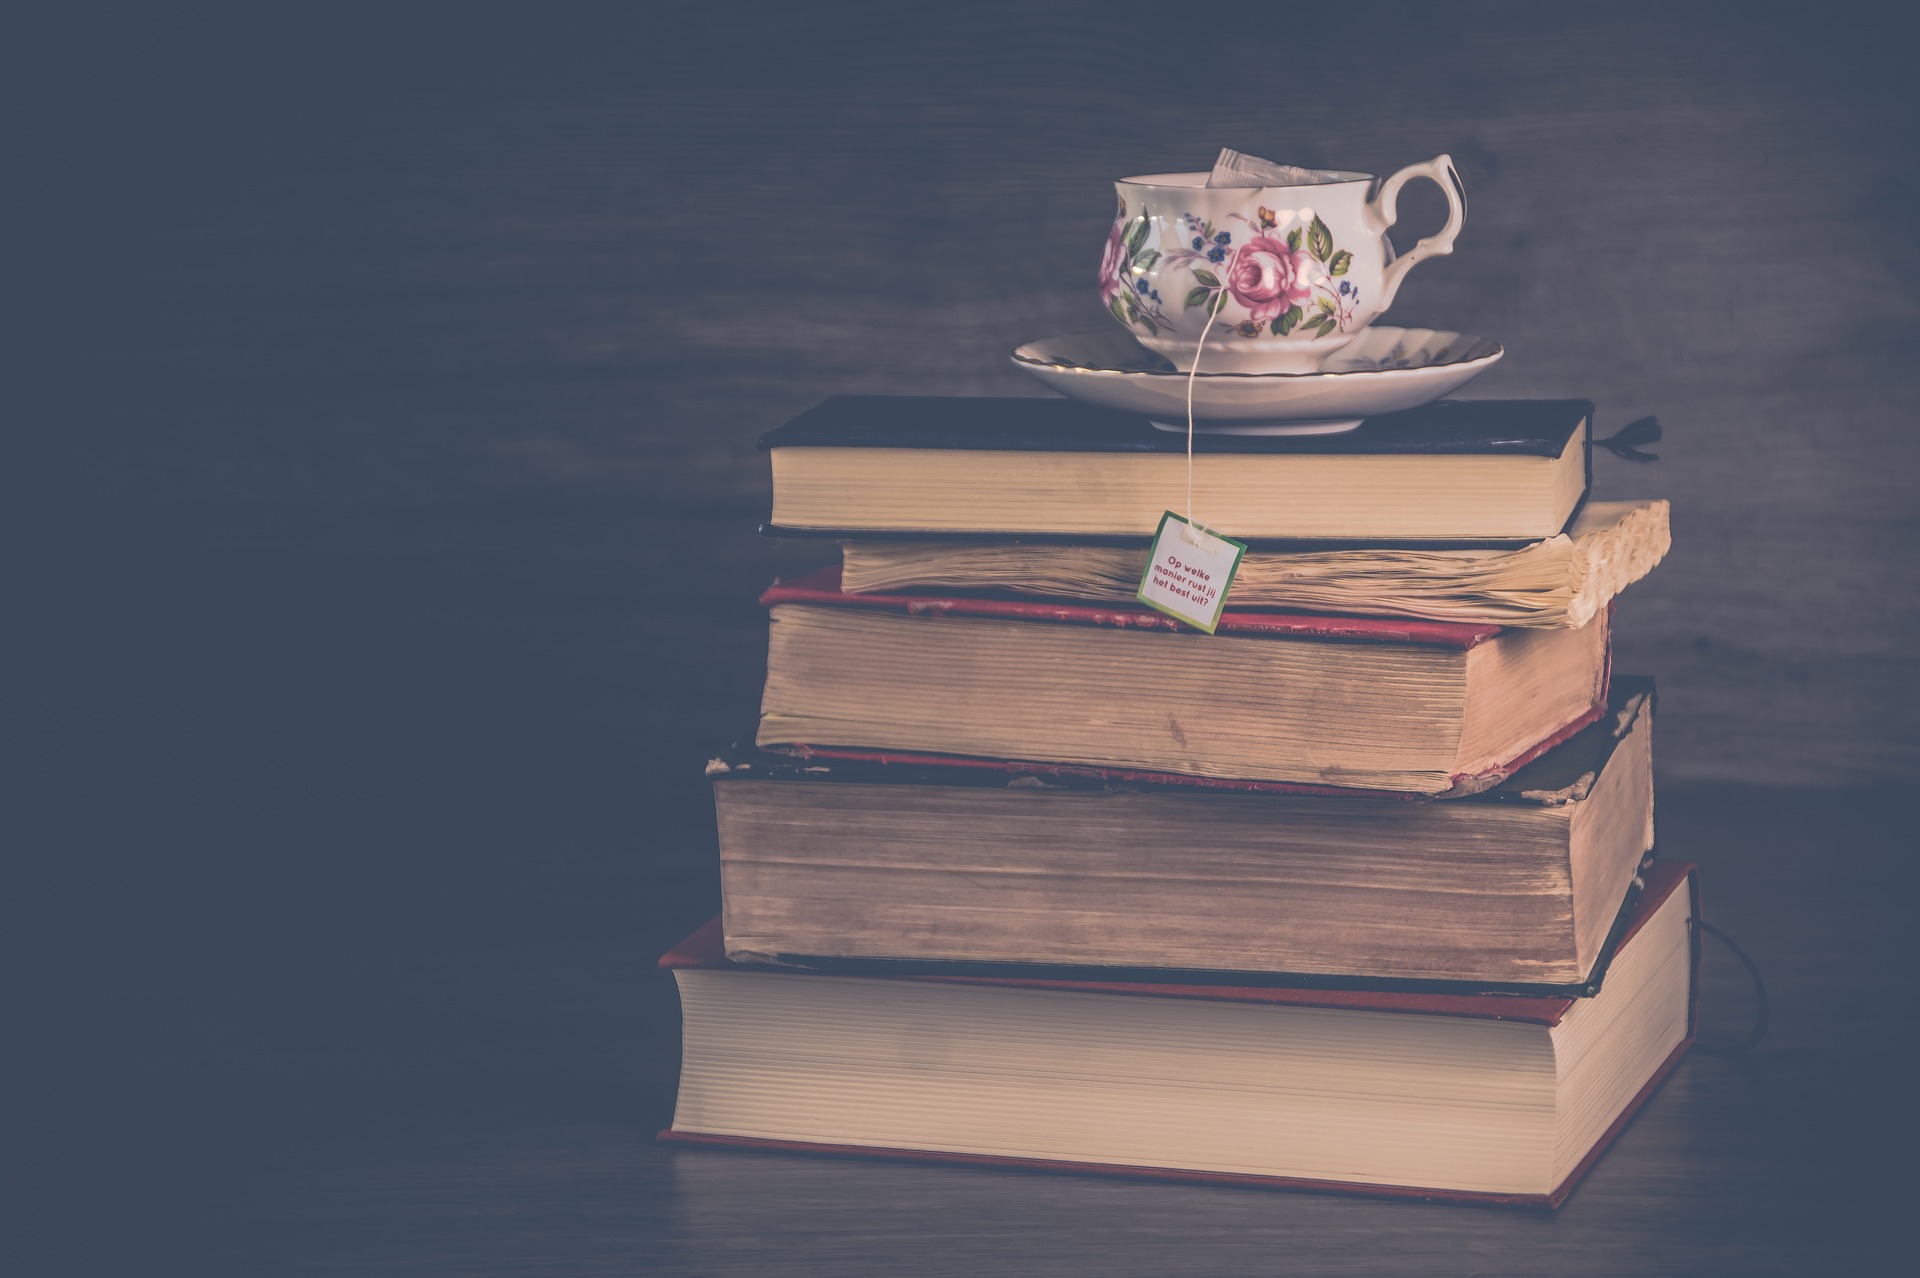 A dark background with a stack of four worn looking books, one quite tattered - page side facing us - with a china mug decorated with pink flowers on a saucer on top, a tea bag tag hanging down from the mug over the top of the stack of books